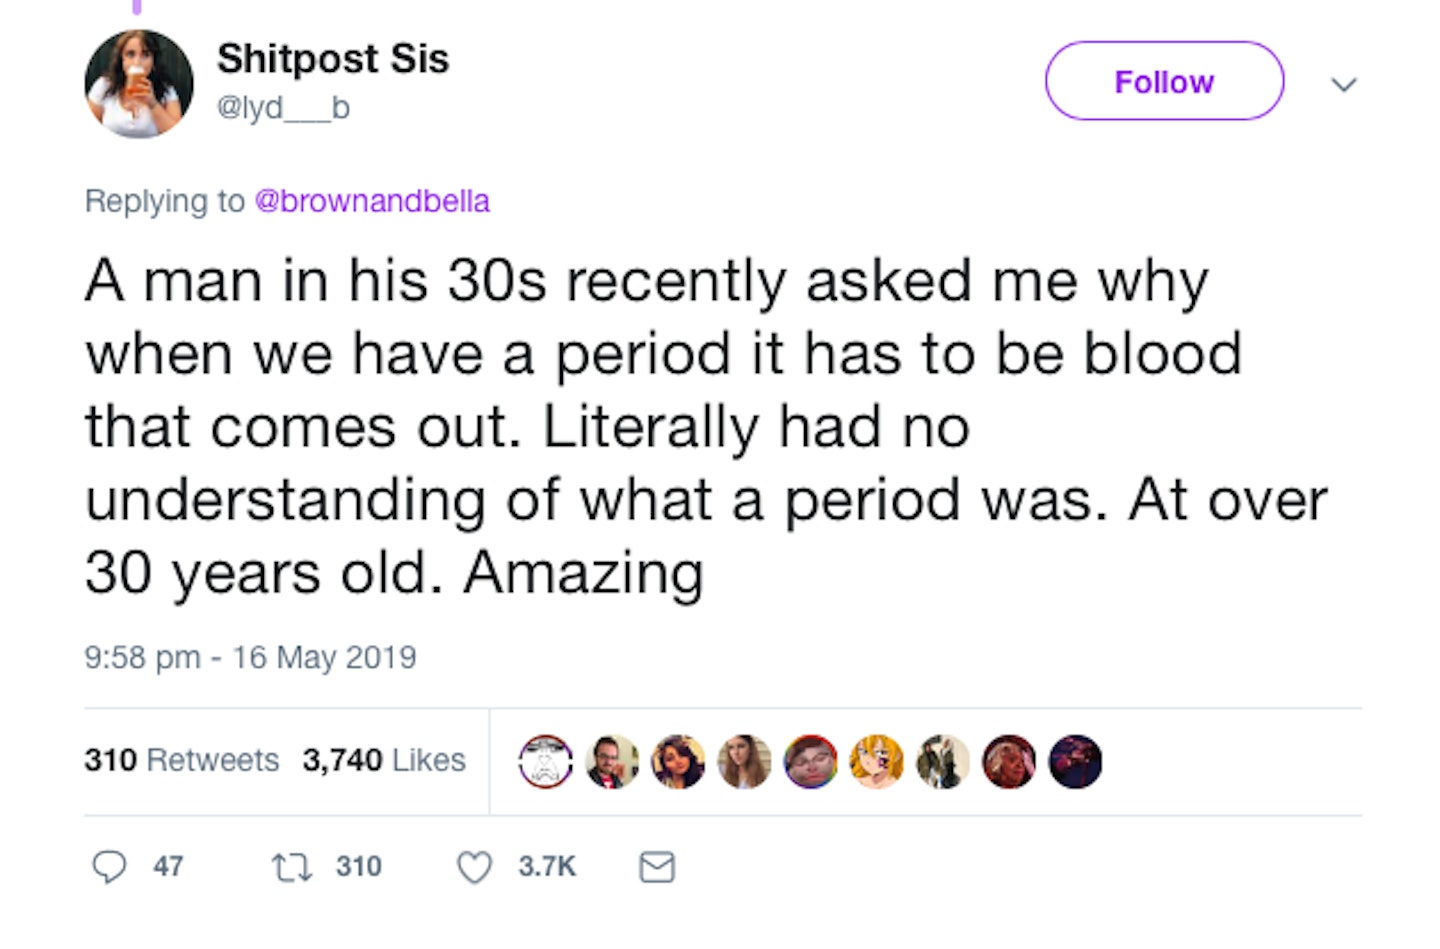 Questions about periods